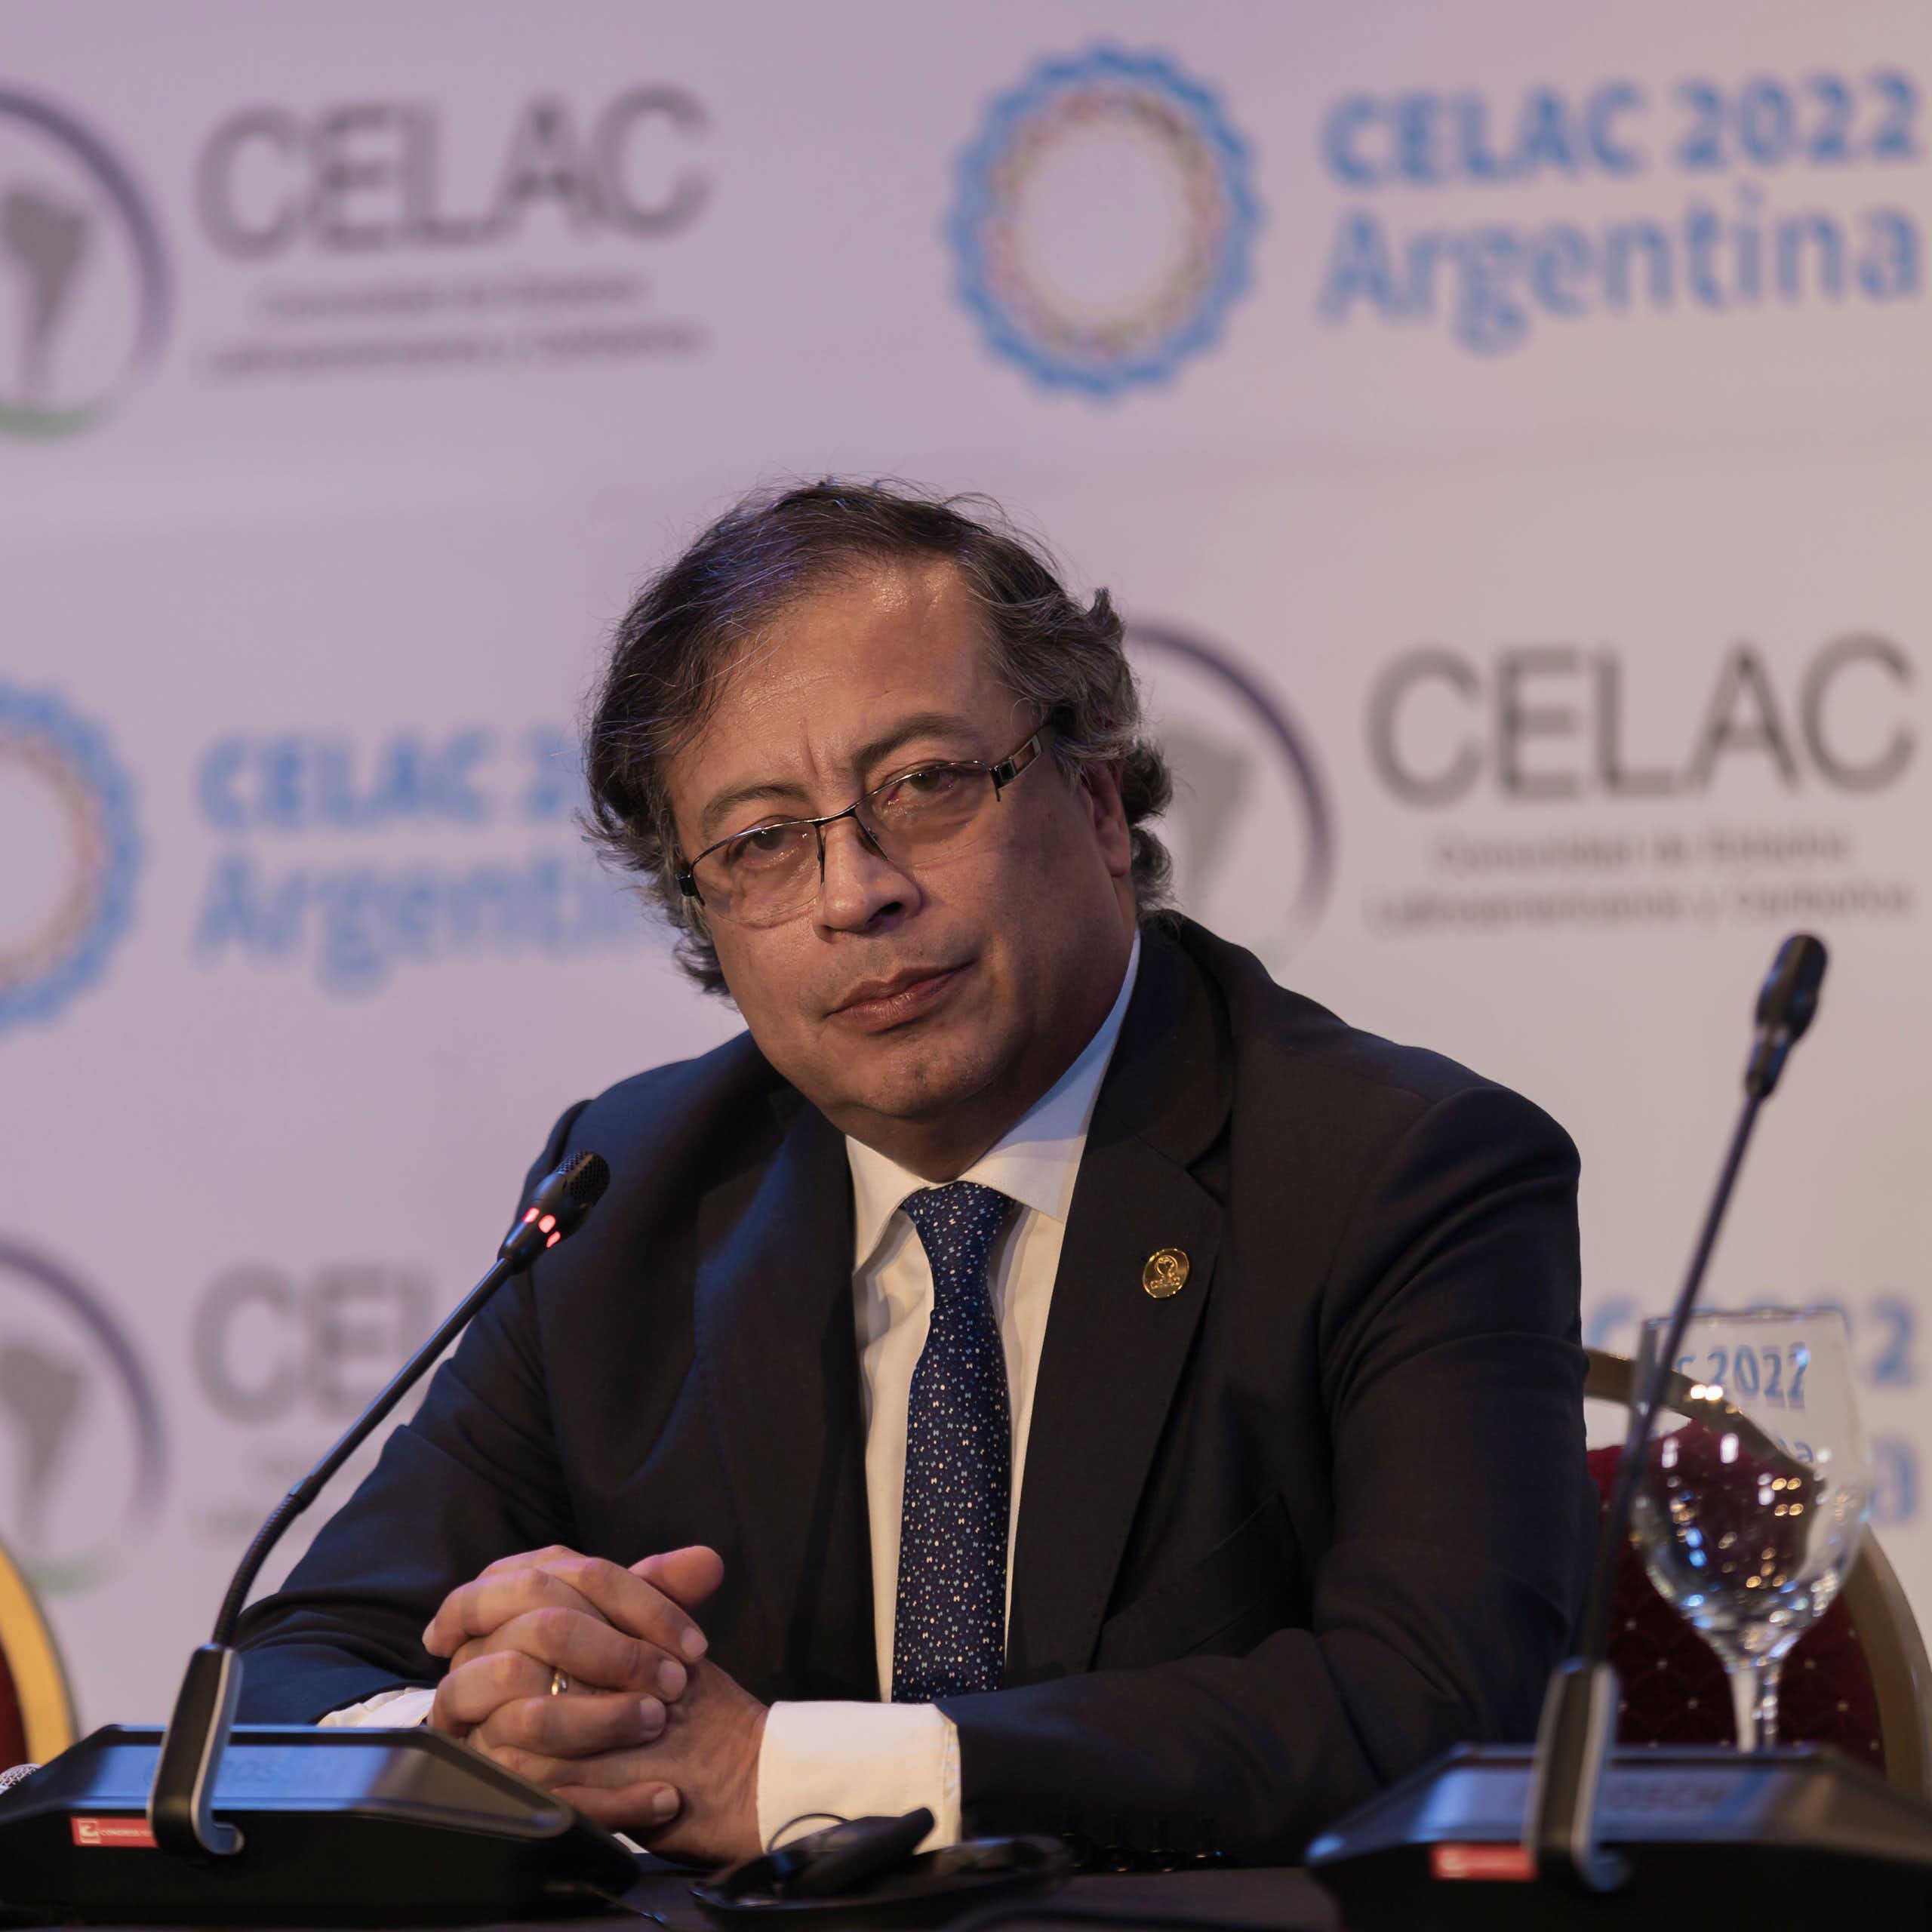 Colombia's president Gustavo Petro sitting at a microphone.